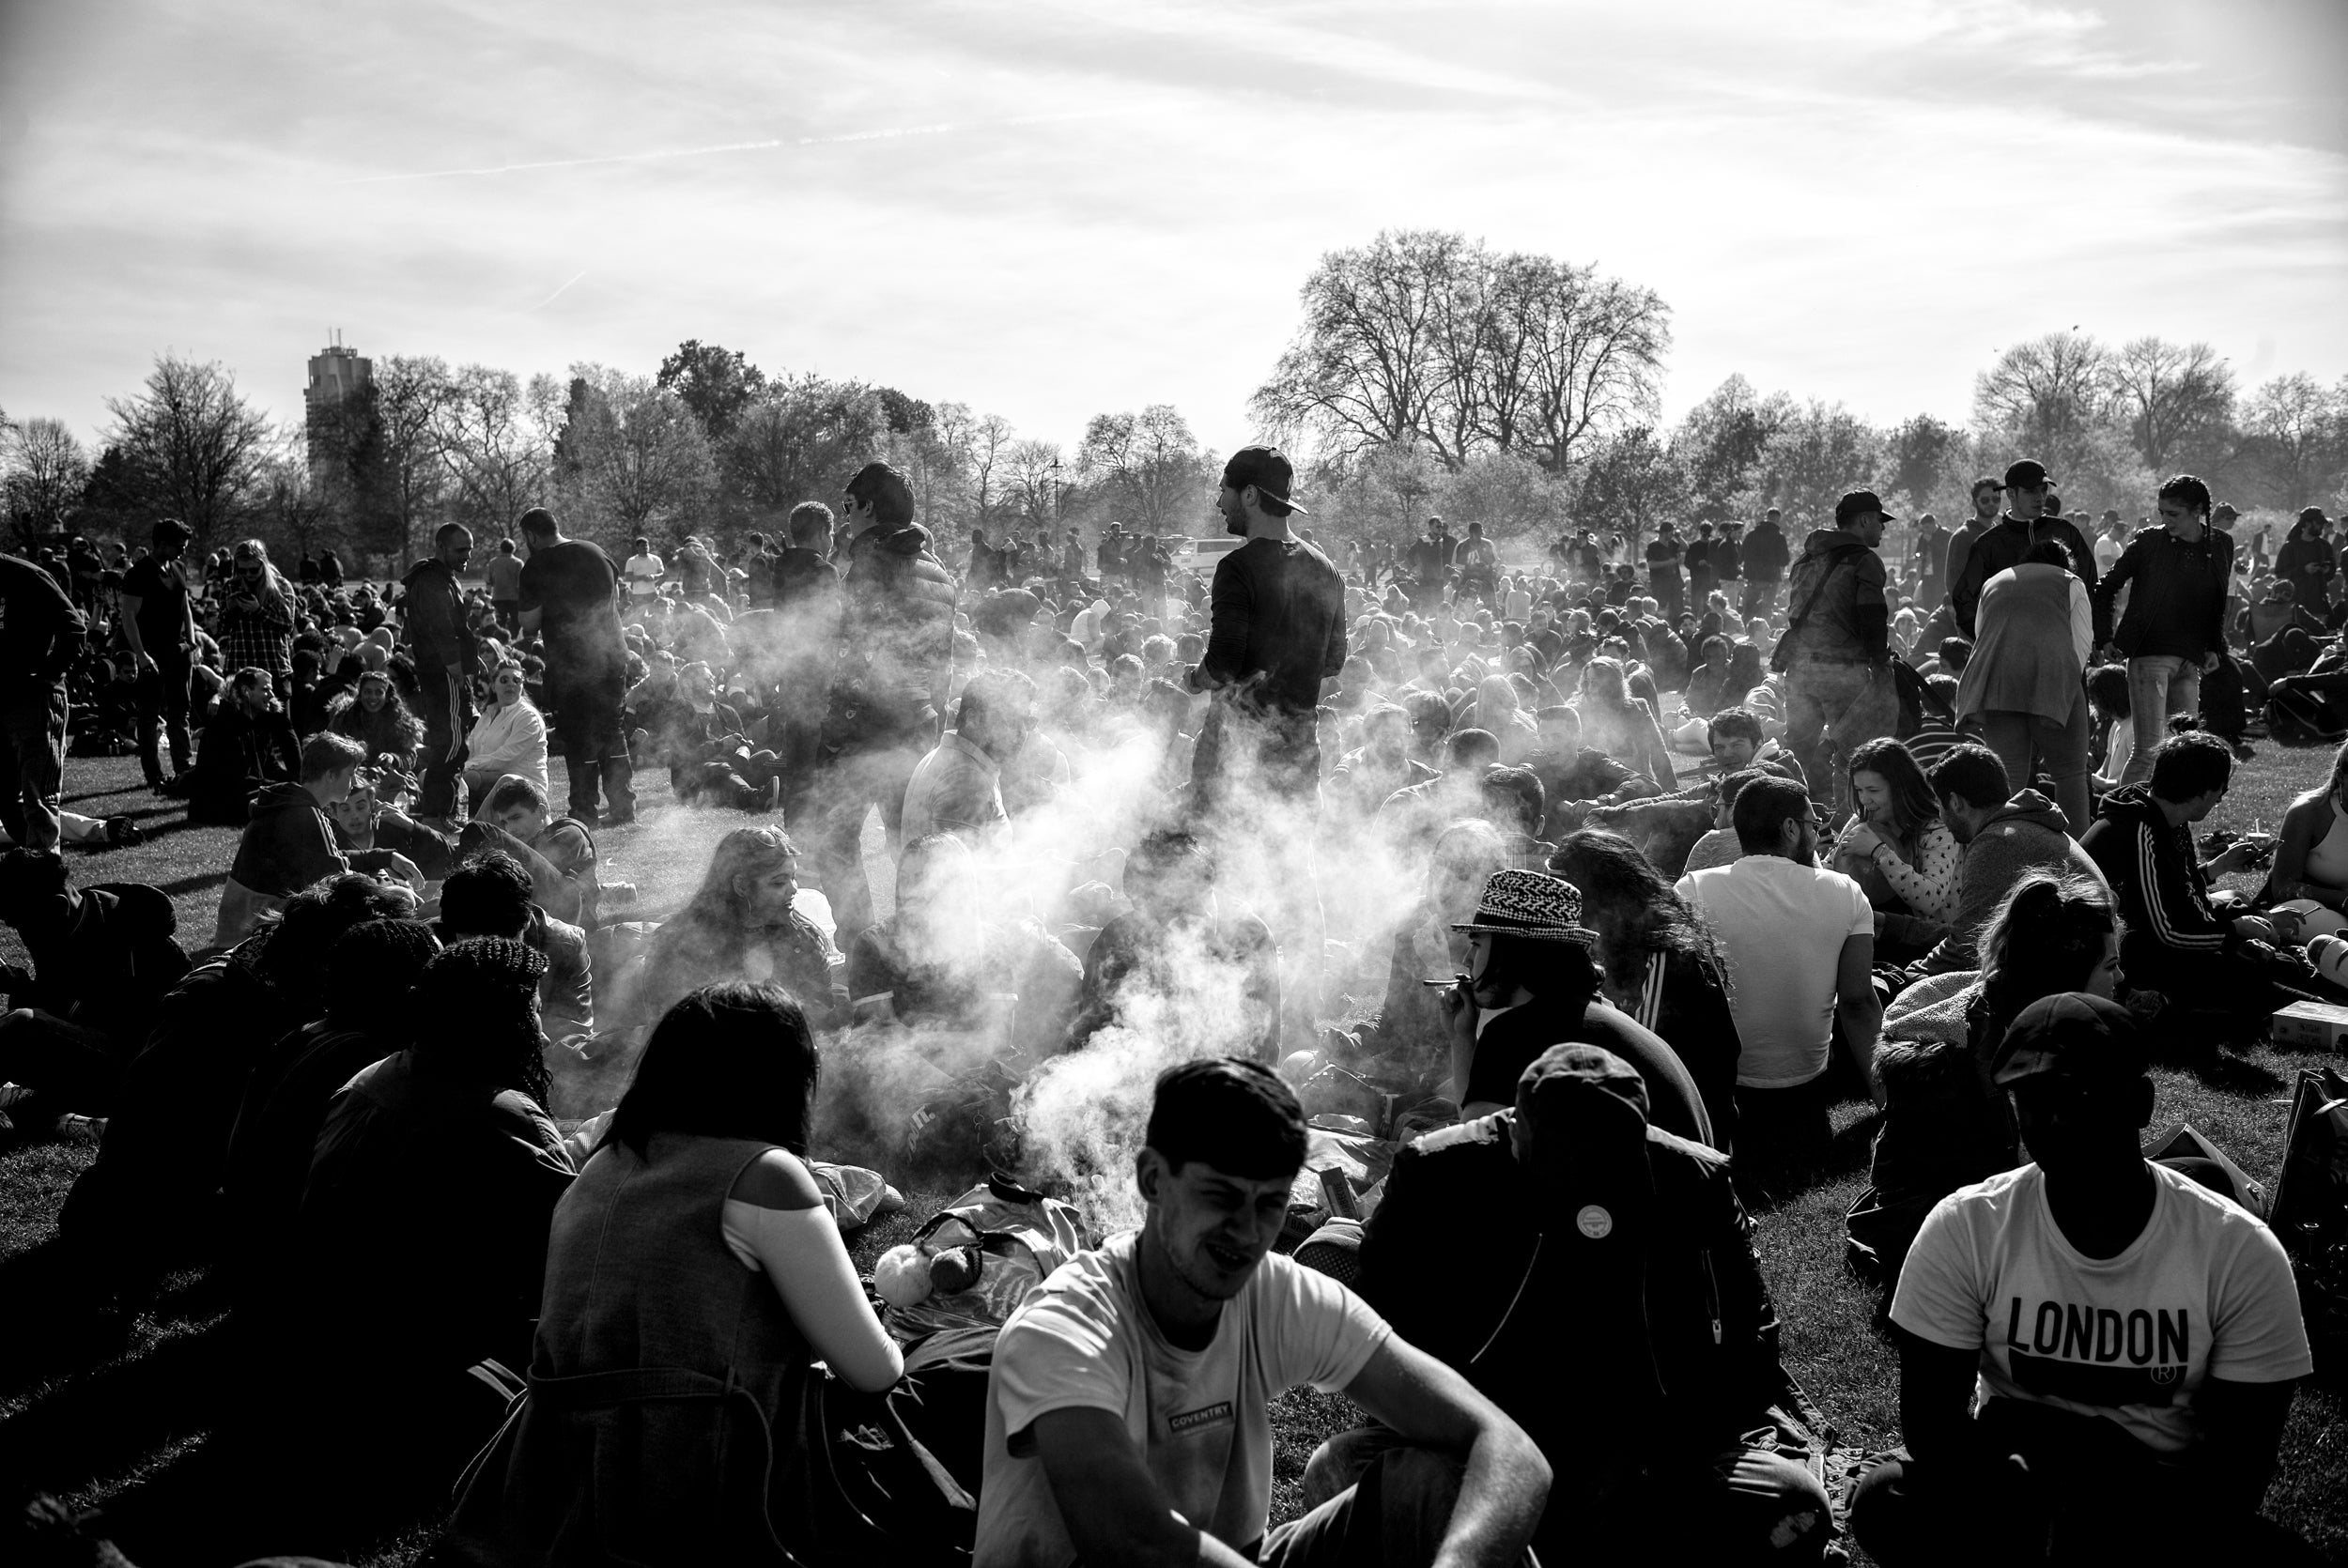 A photo from last year's 420 celebration in Hyde Park (Photo: Alan Schaller/The Independent)